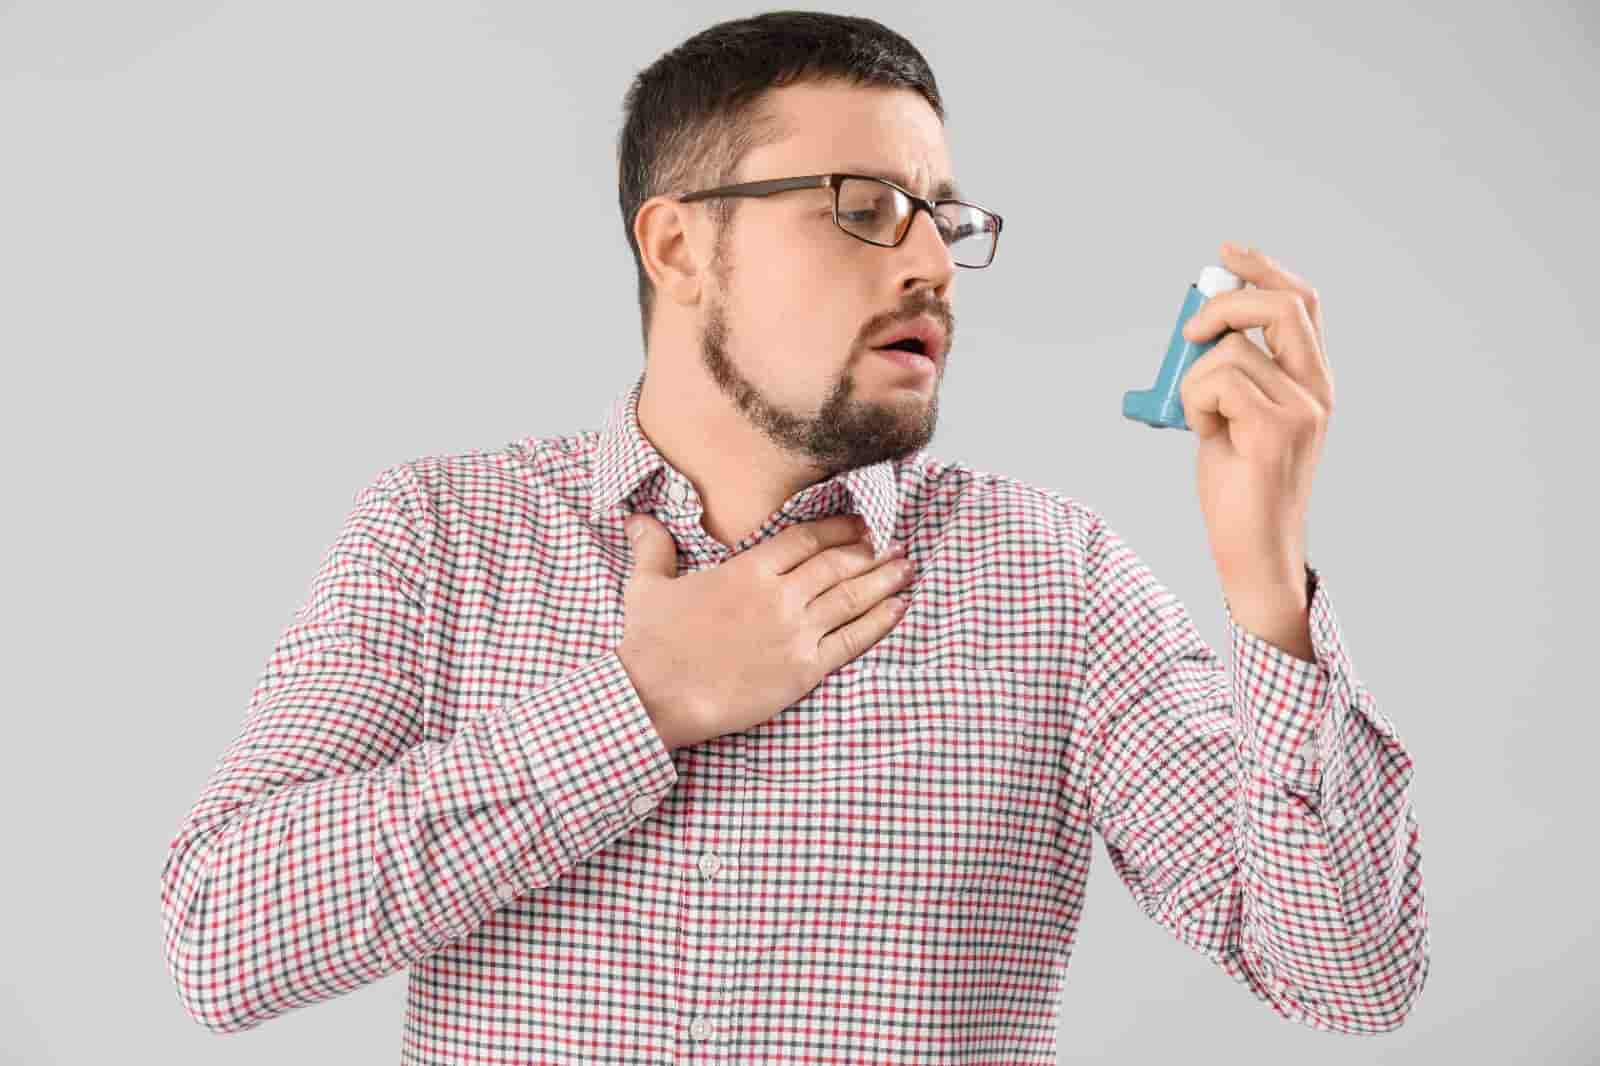 Can ventolin really help with coughs?